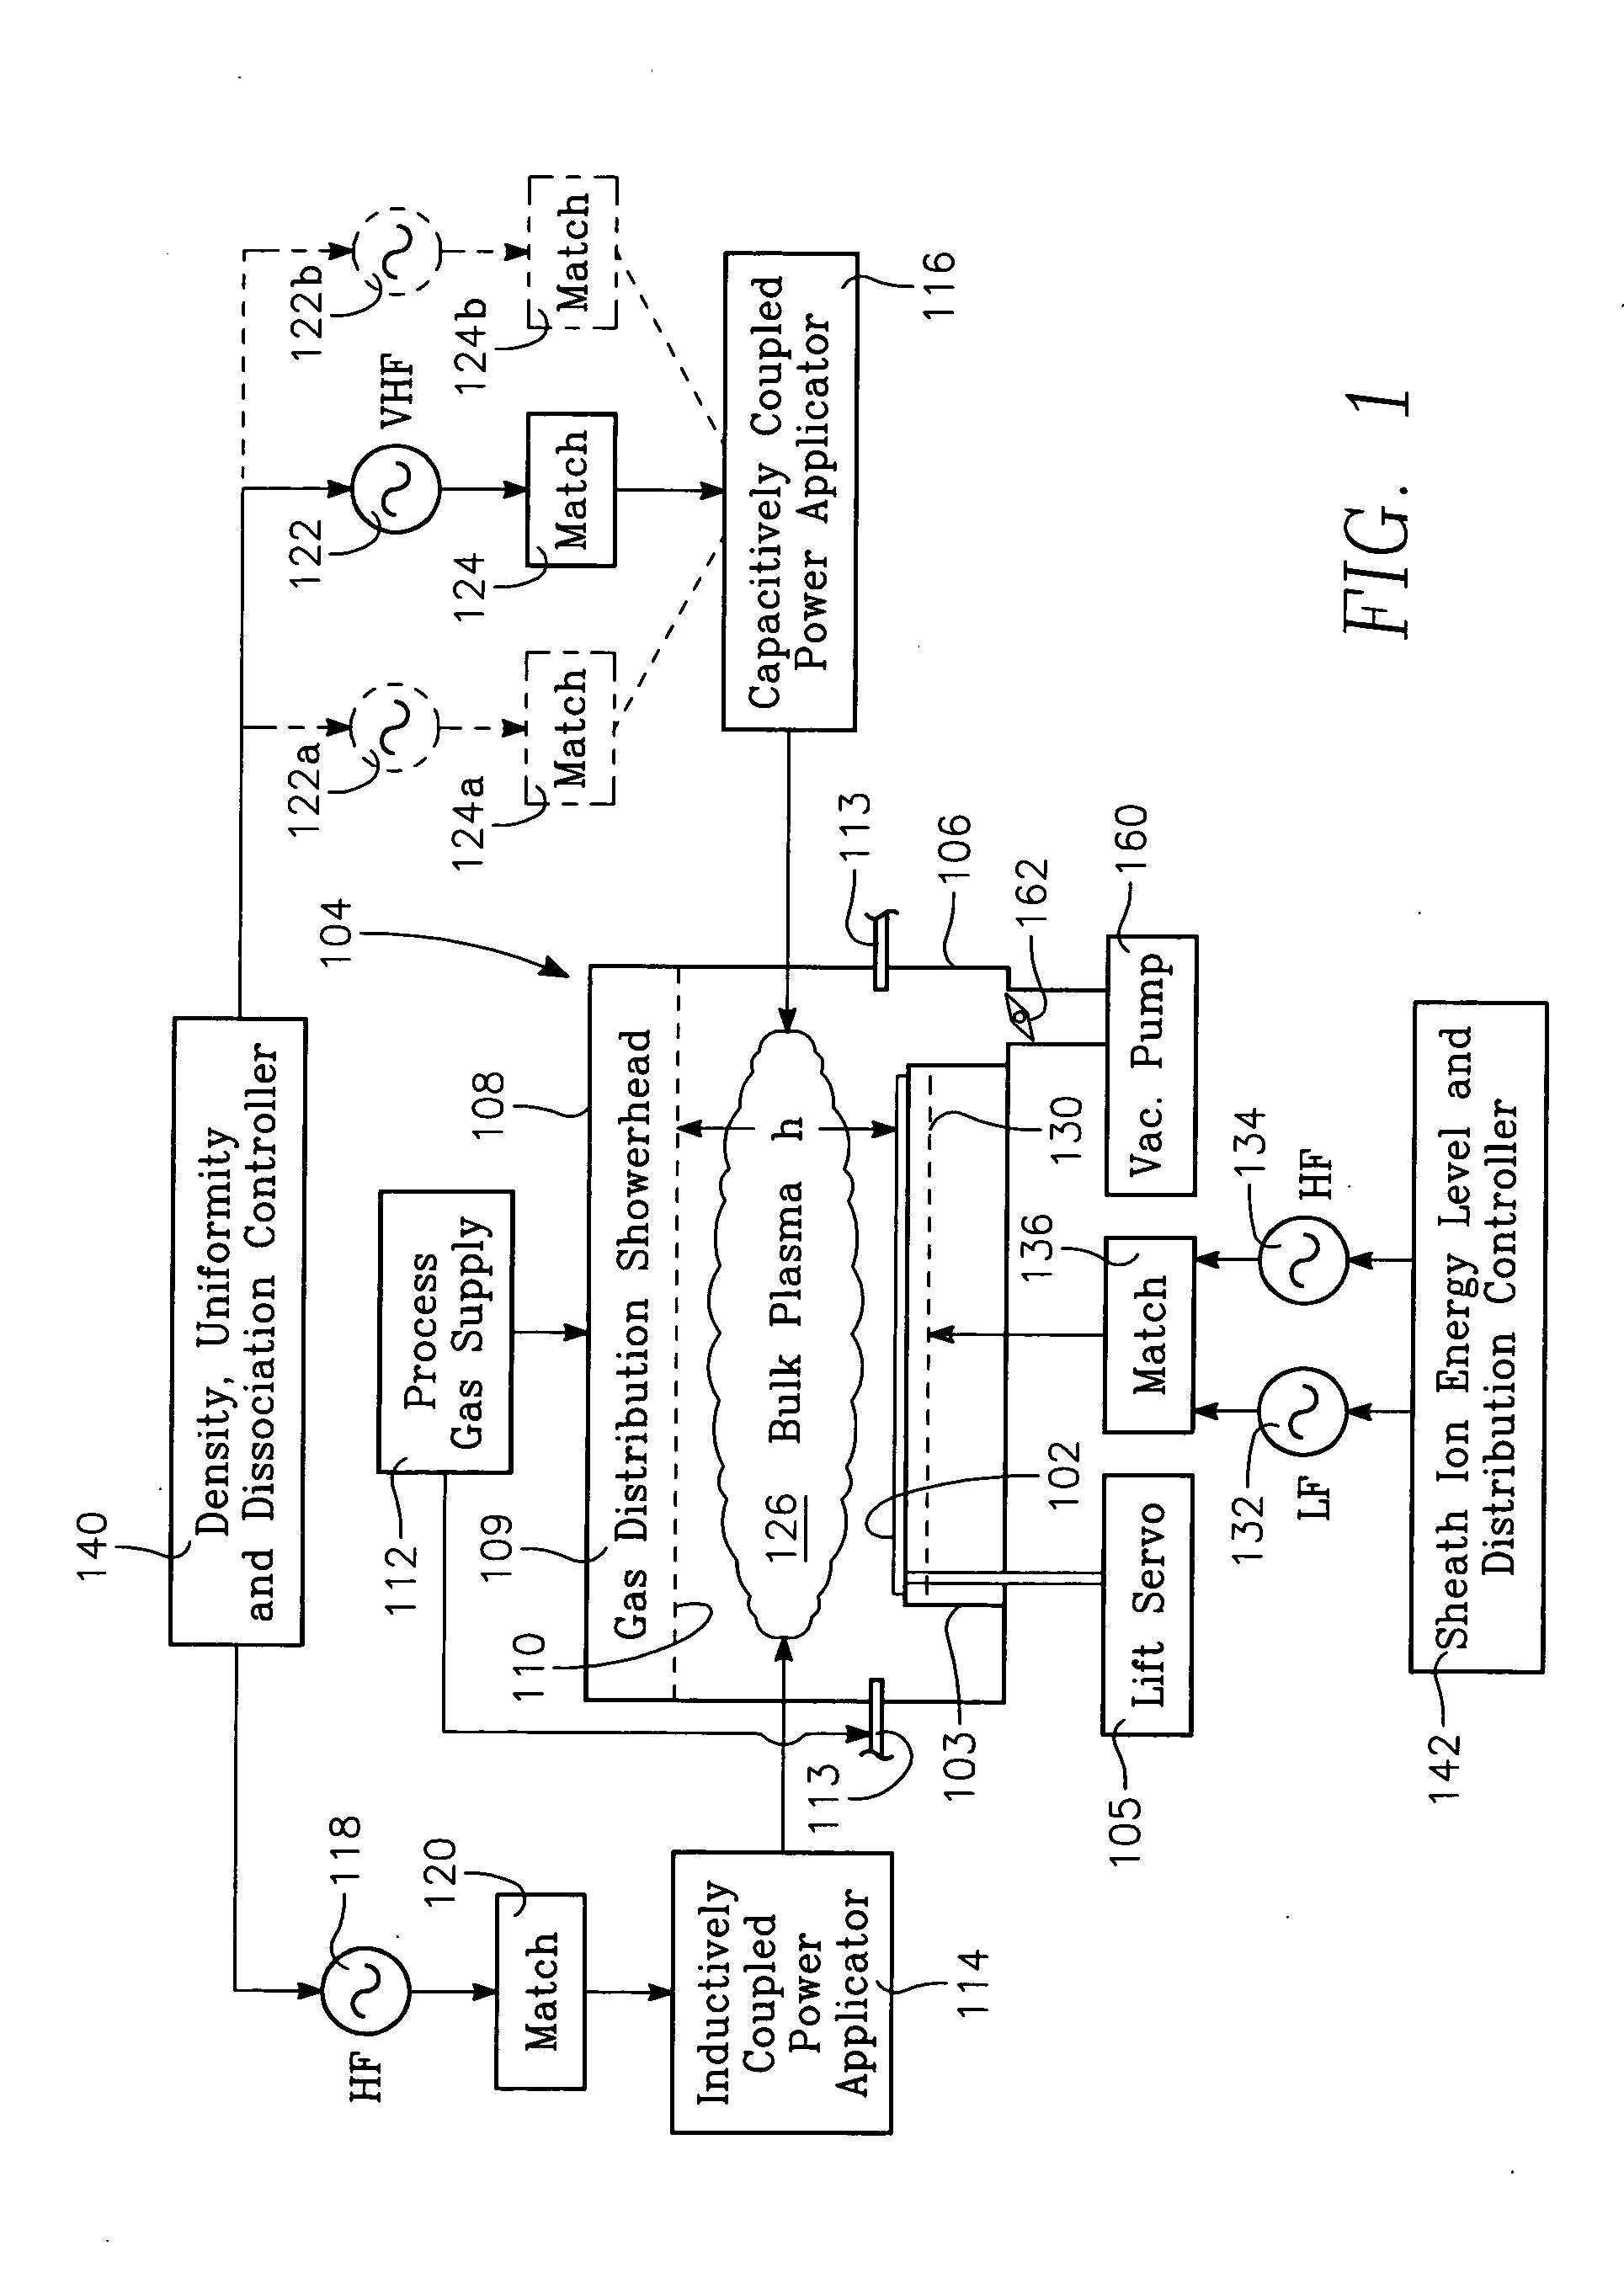 Process using combined capacitively and inductively coupled plasma process for controlling plasma ion dissociation